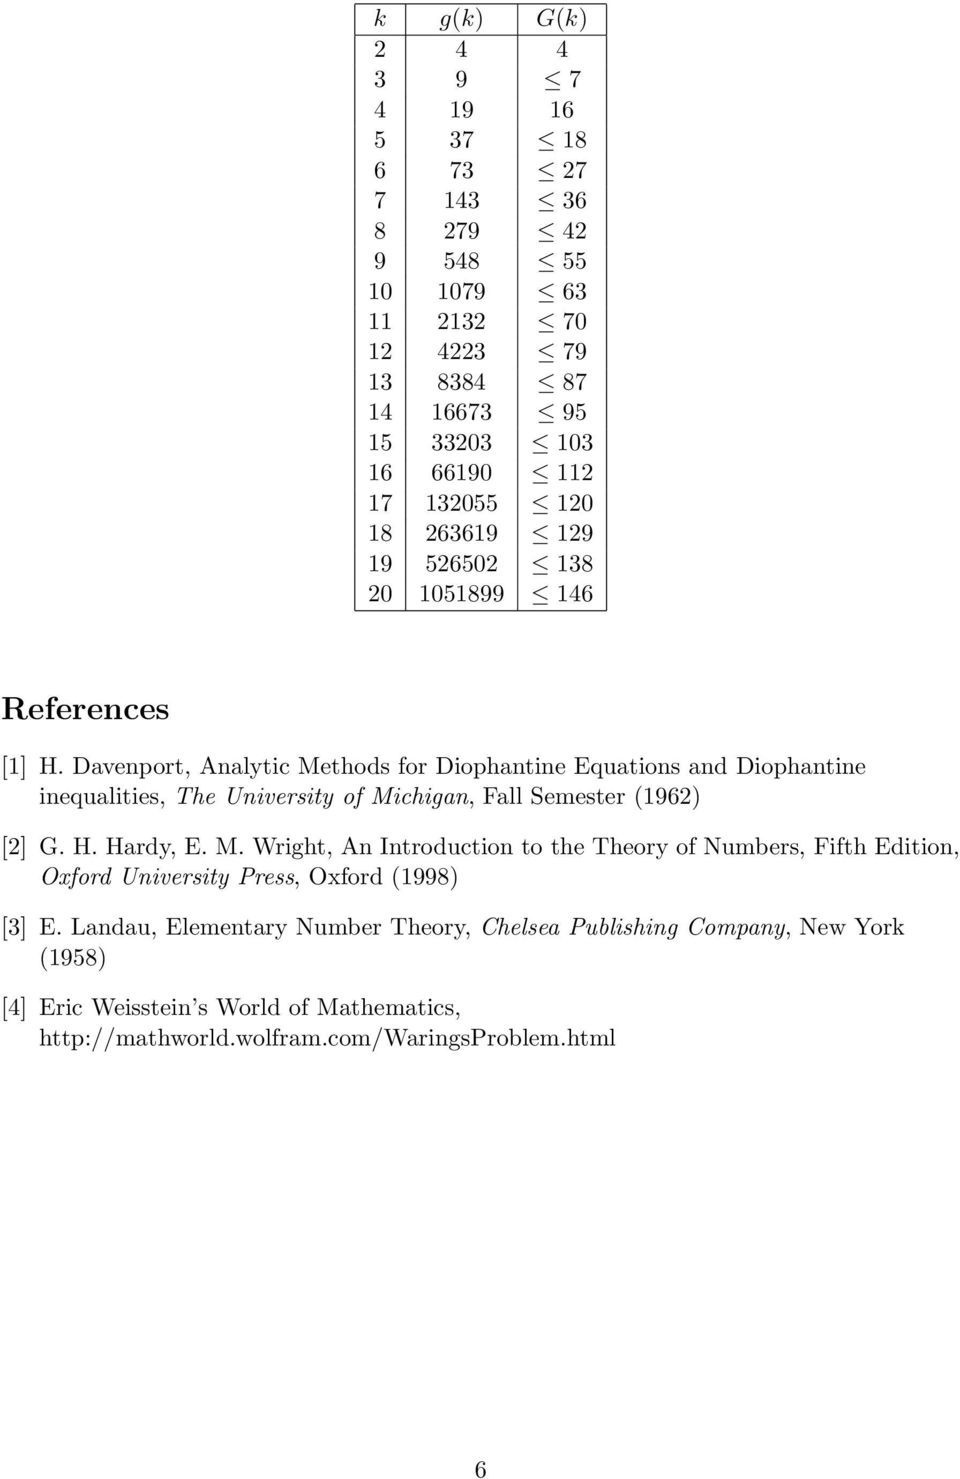 Davenport, Analytic Methods for Diophantine Equations and Diophantine inequalities, The University of Michigan, Fall Semester (196) [] G. H. Hardy, E. M. Wright, An Introduction to the Theory of Numbers, Fifth Edition, Oxford University Press, Oxford (1998) [3] E.